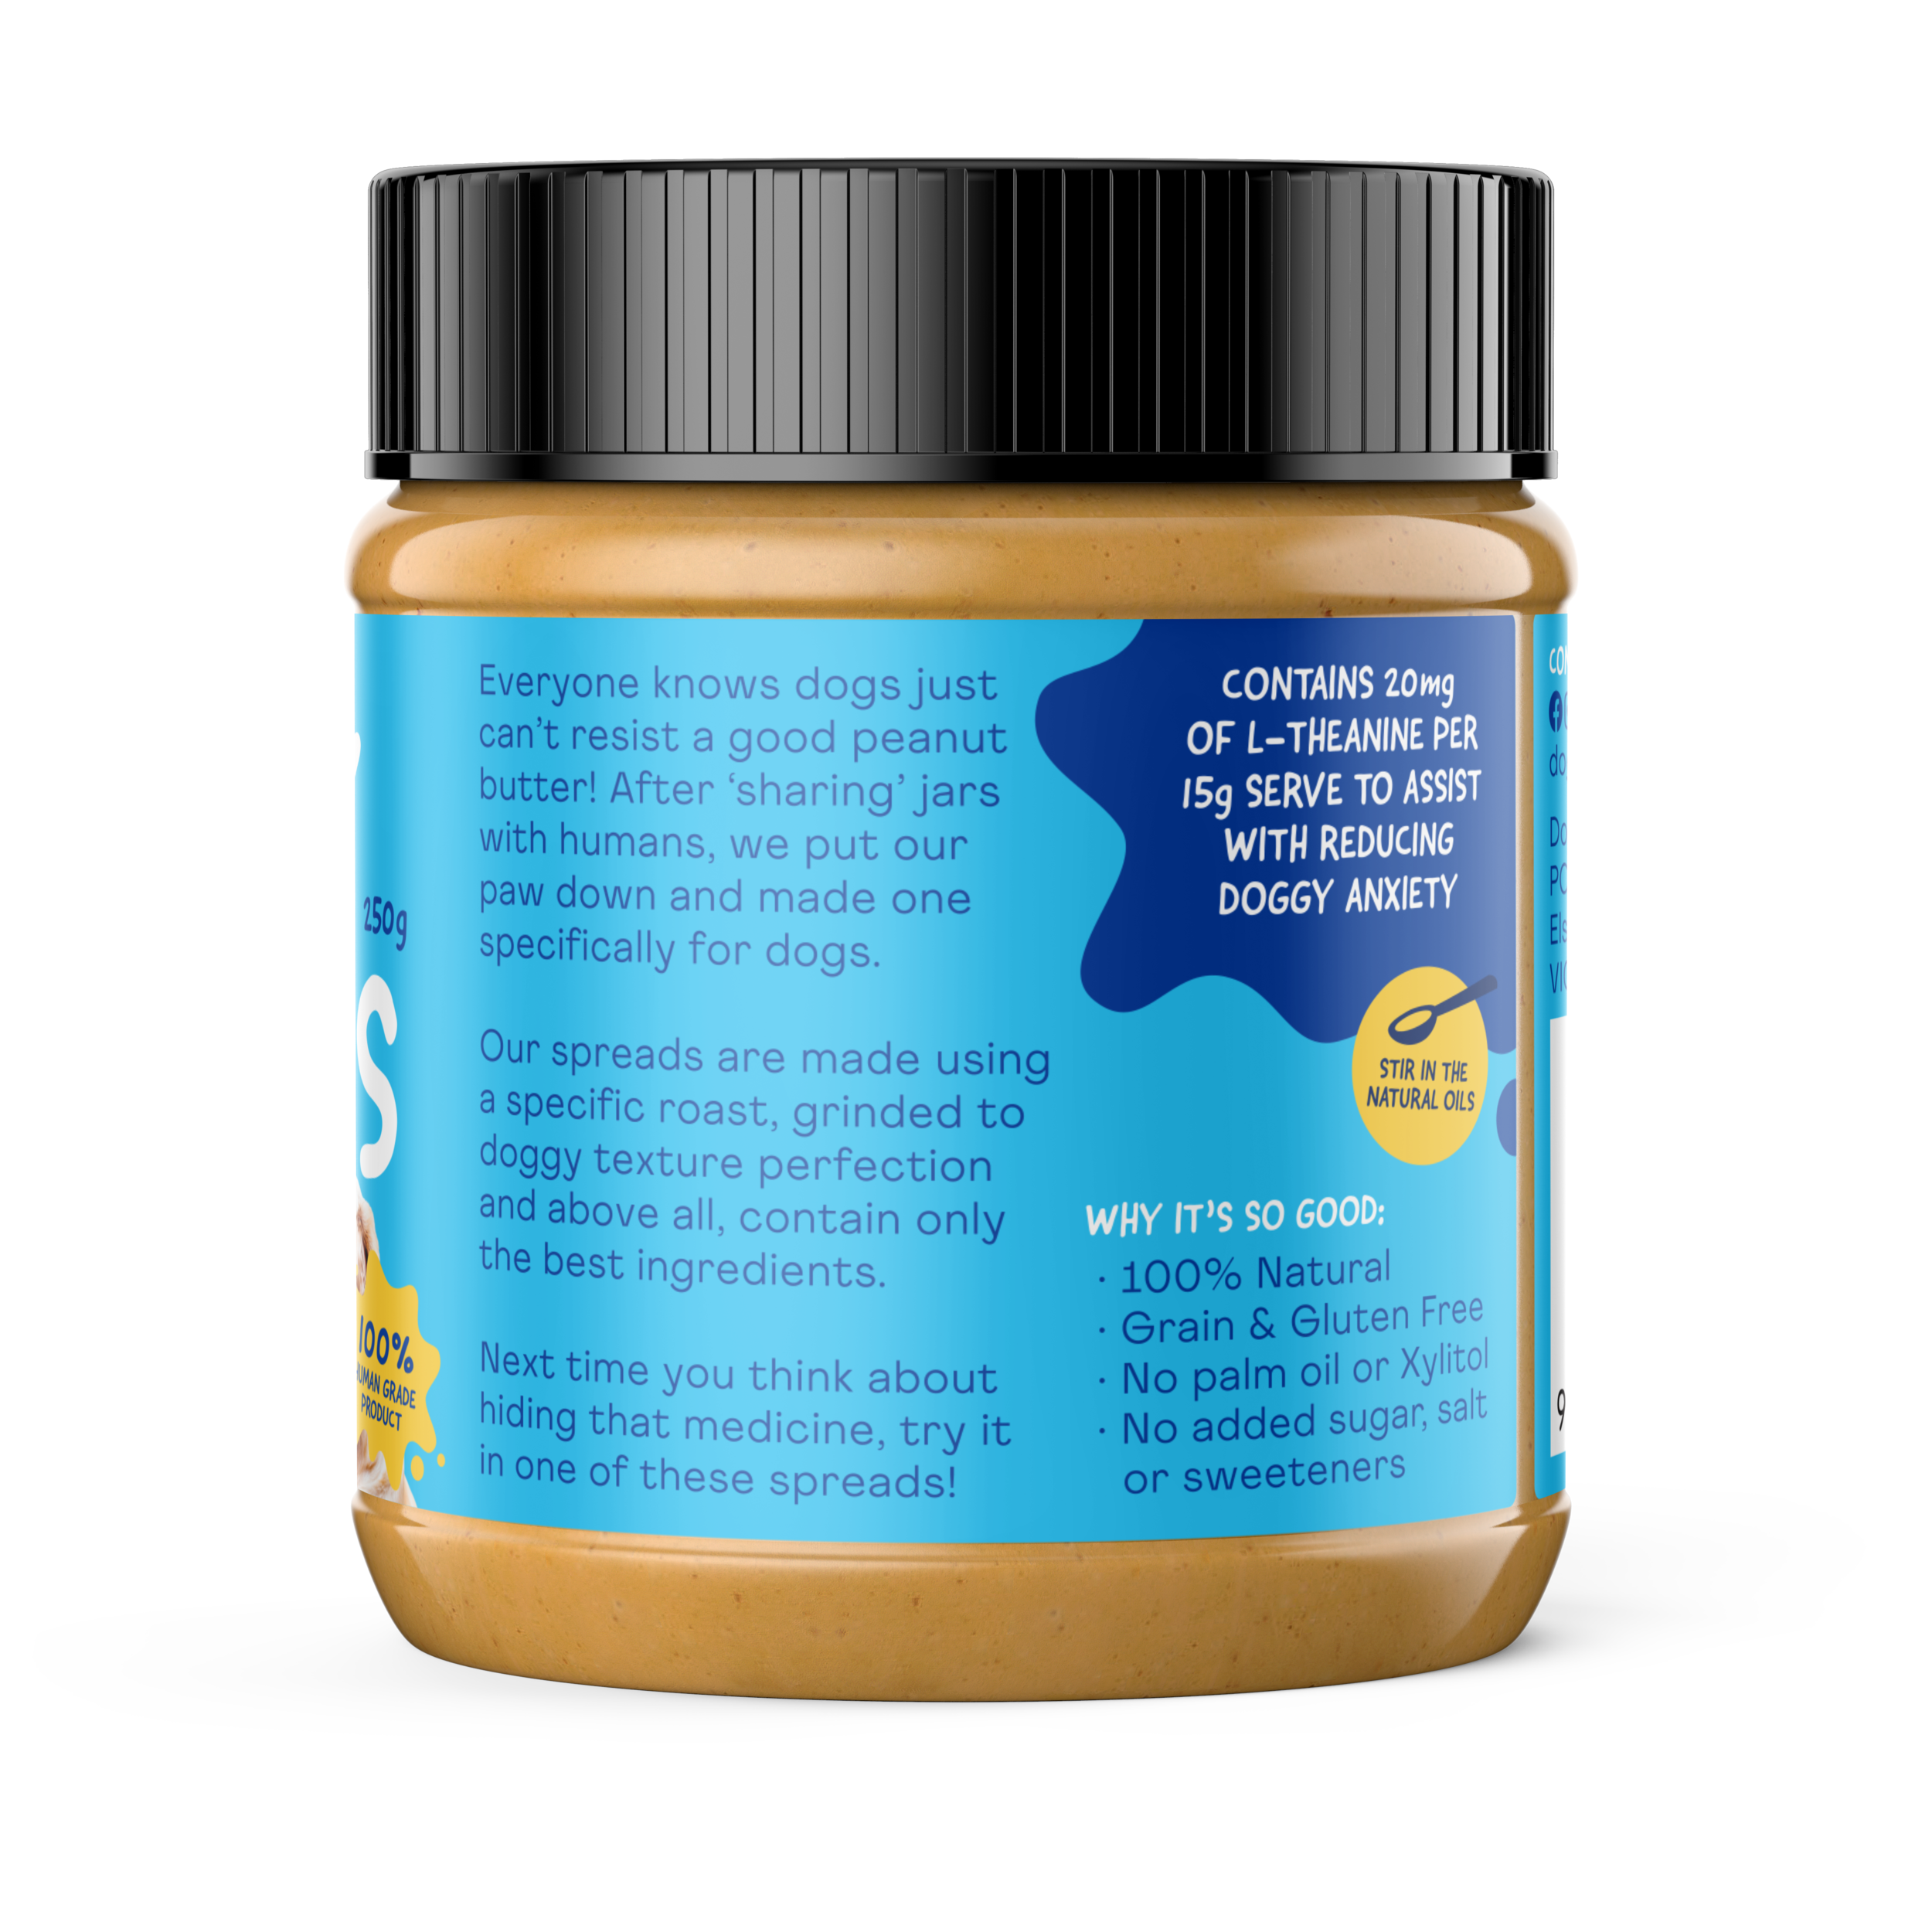 Doggylicious Doggy Peanut Butter - Calming (250g)